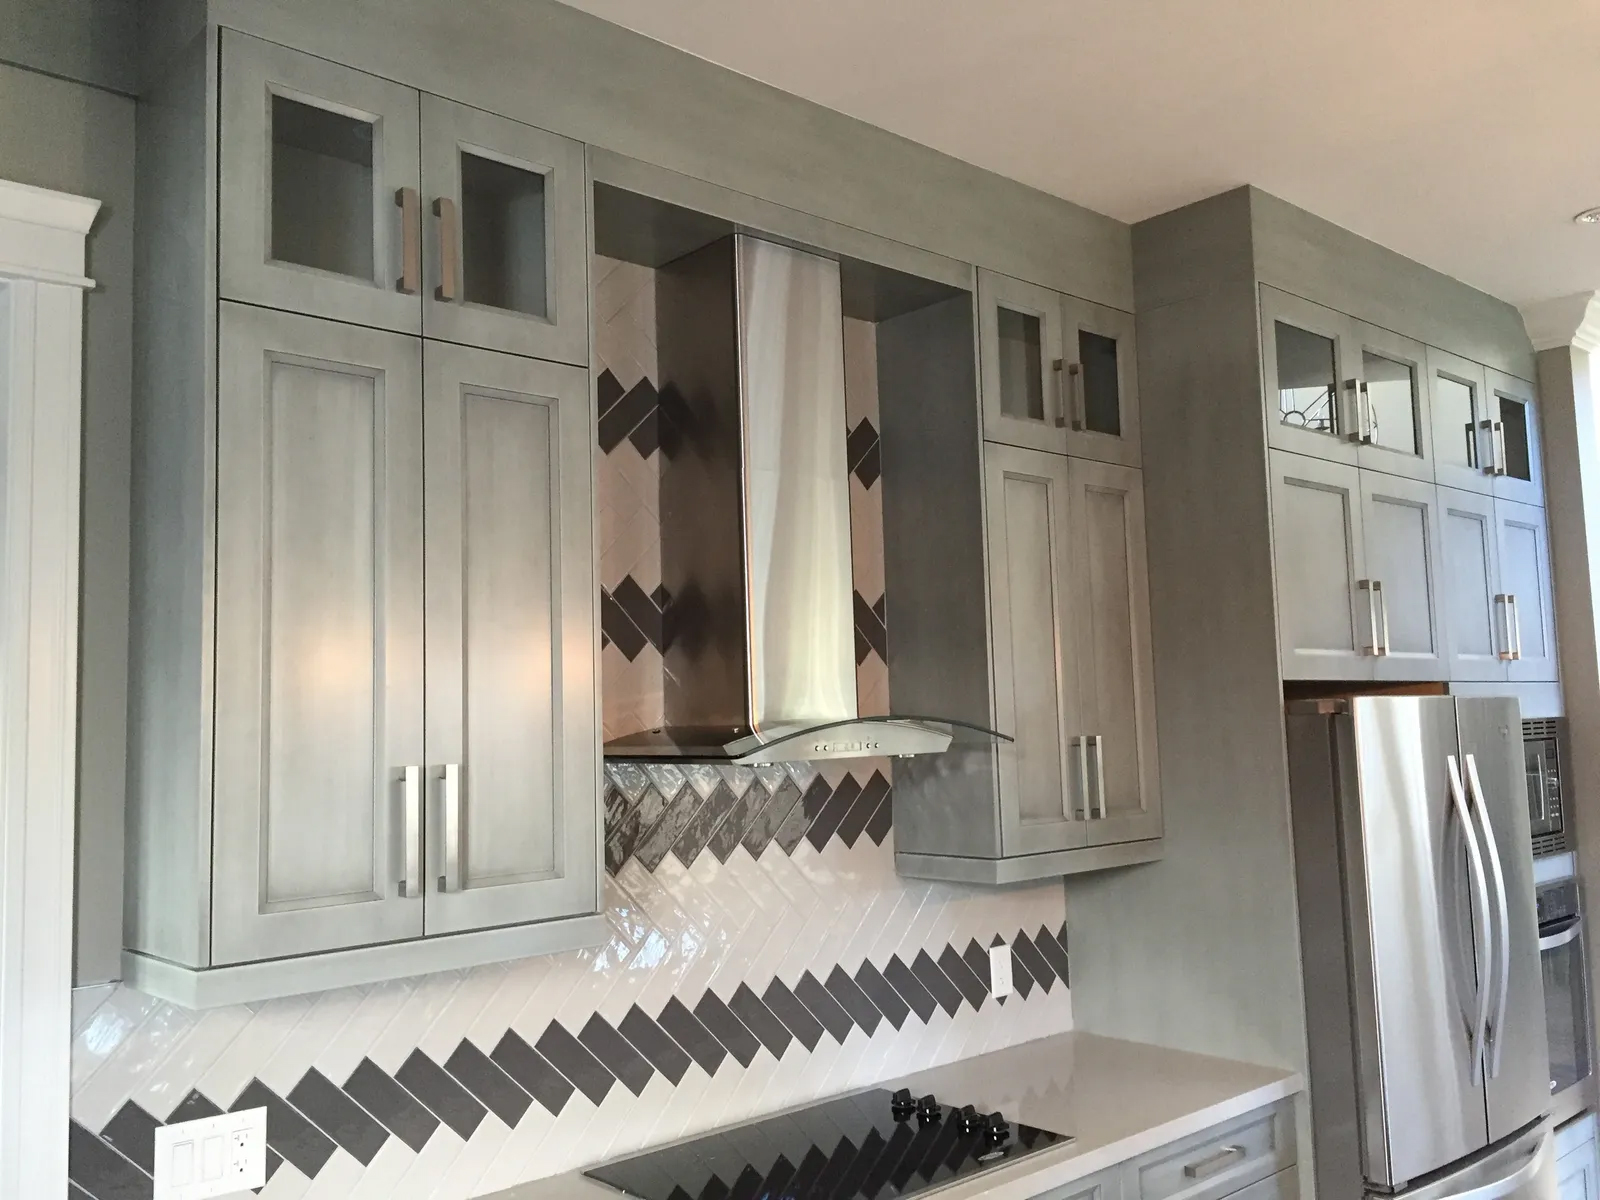 Select Kitchen Cabinets 11 